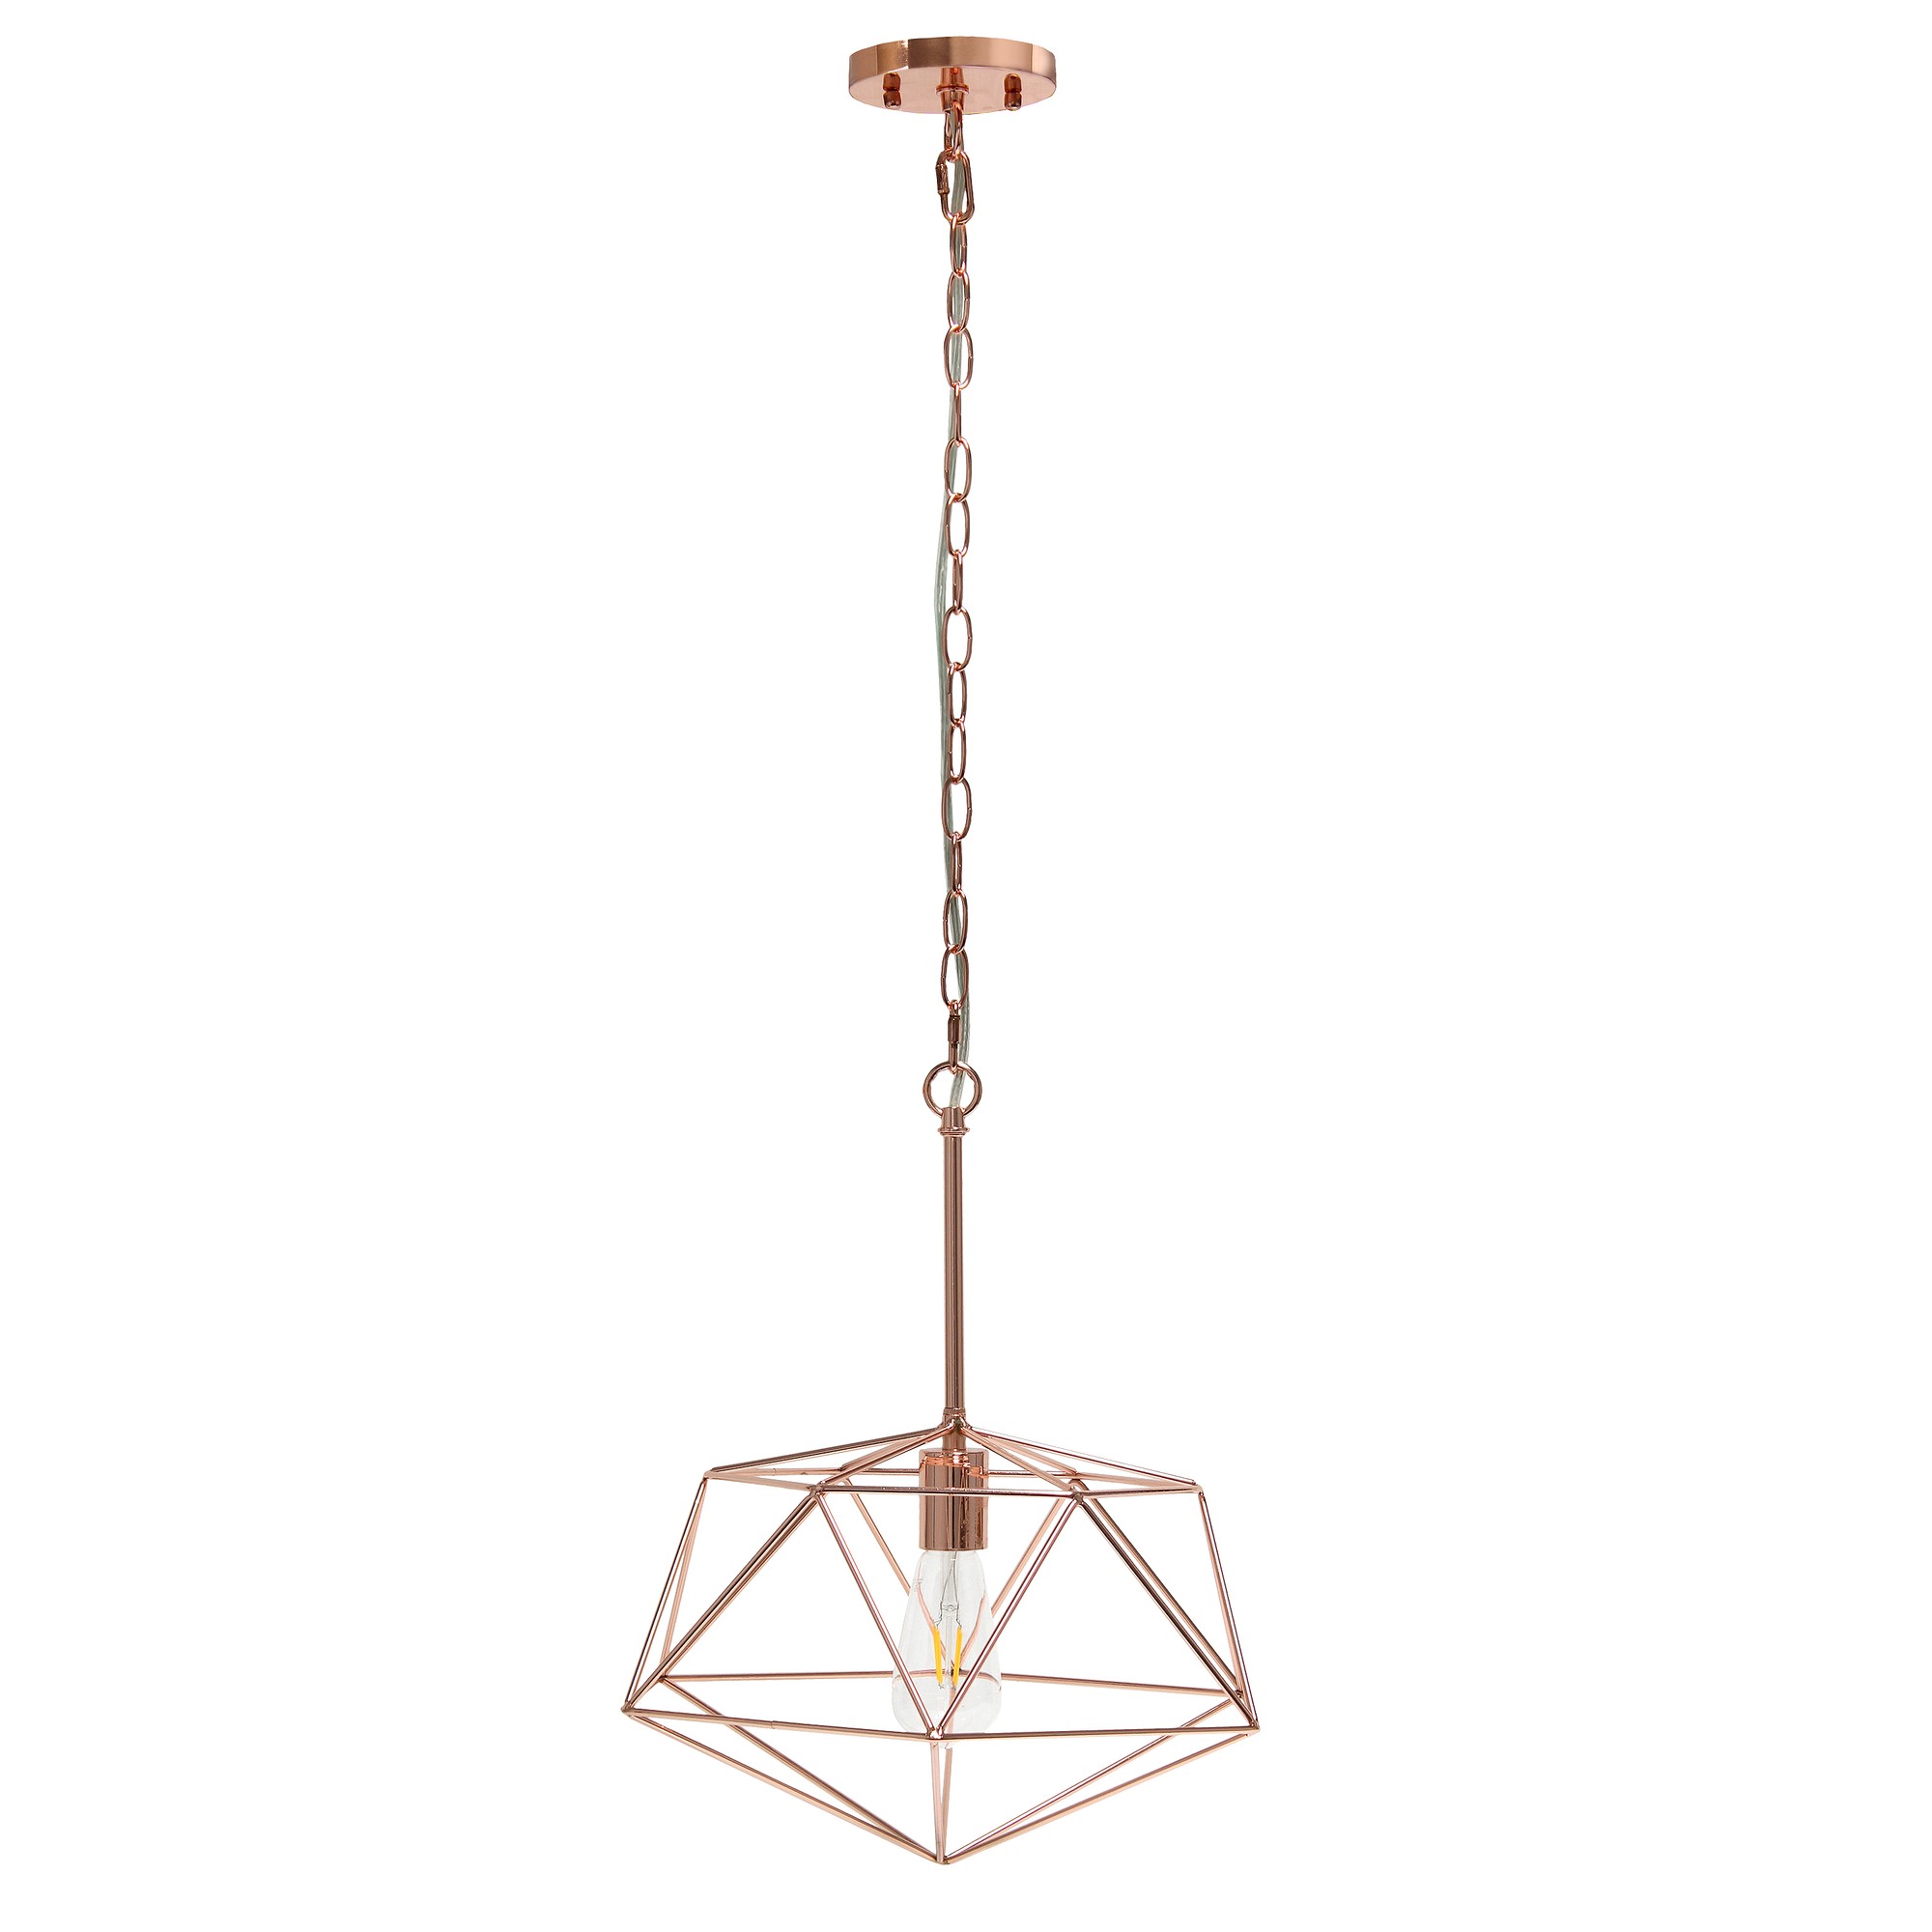 Lalia Home 1 Light 16" Modern Metal Wire Paragon Hanging Ceiling Pendant Fixture, Rose Gold